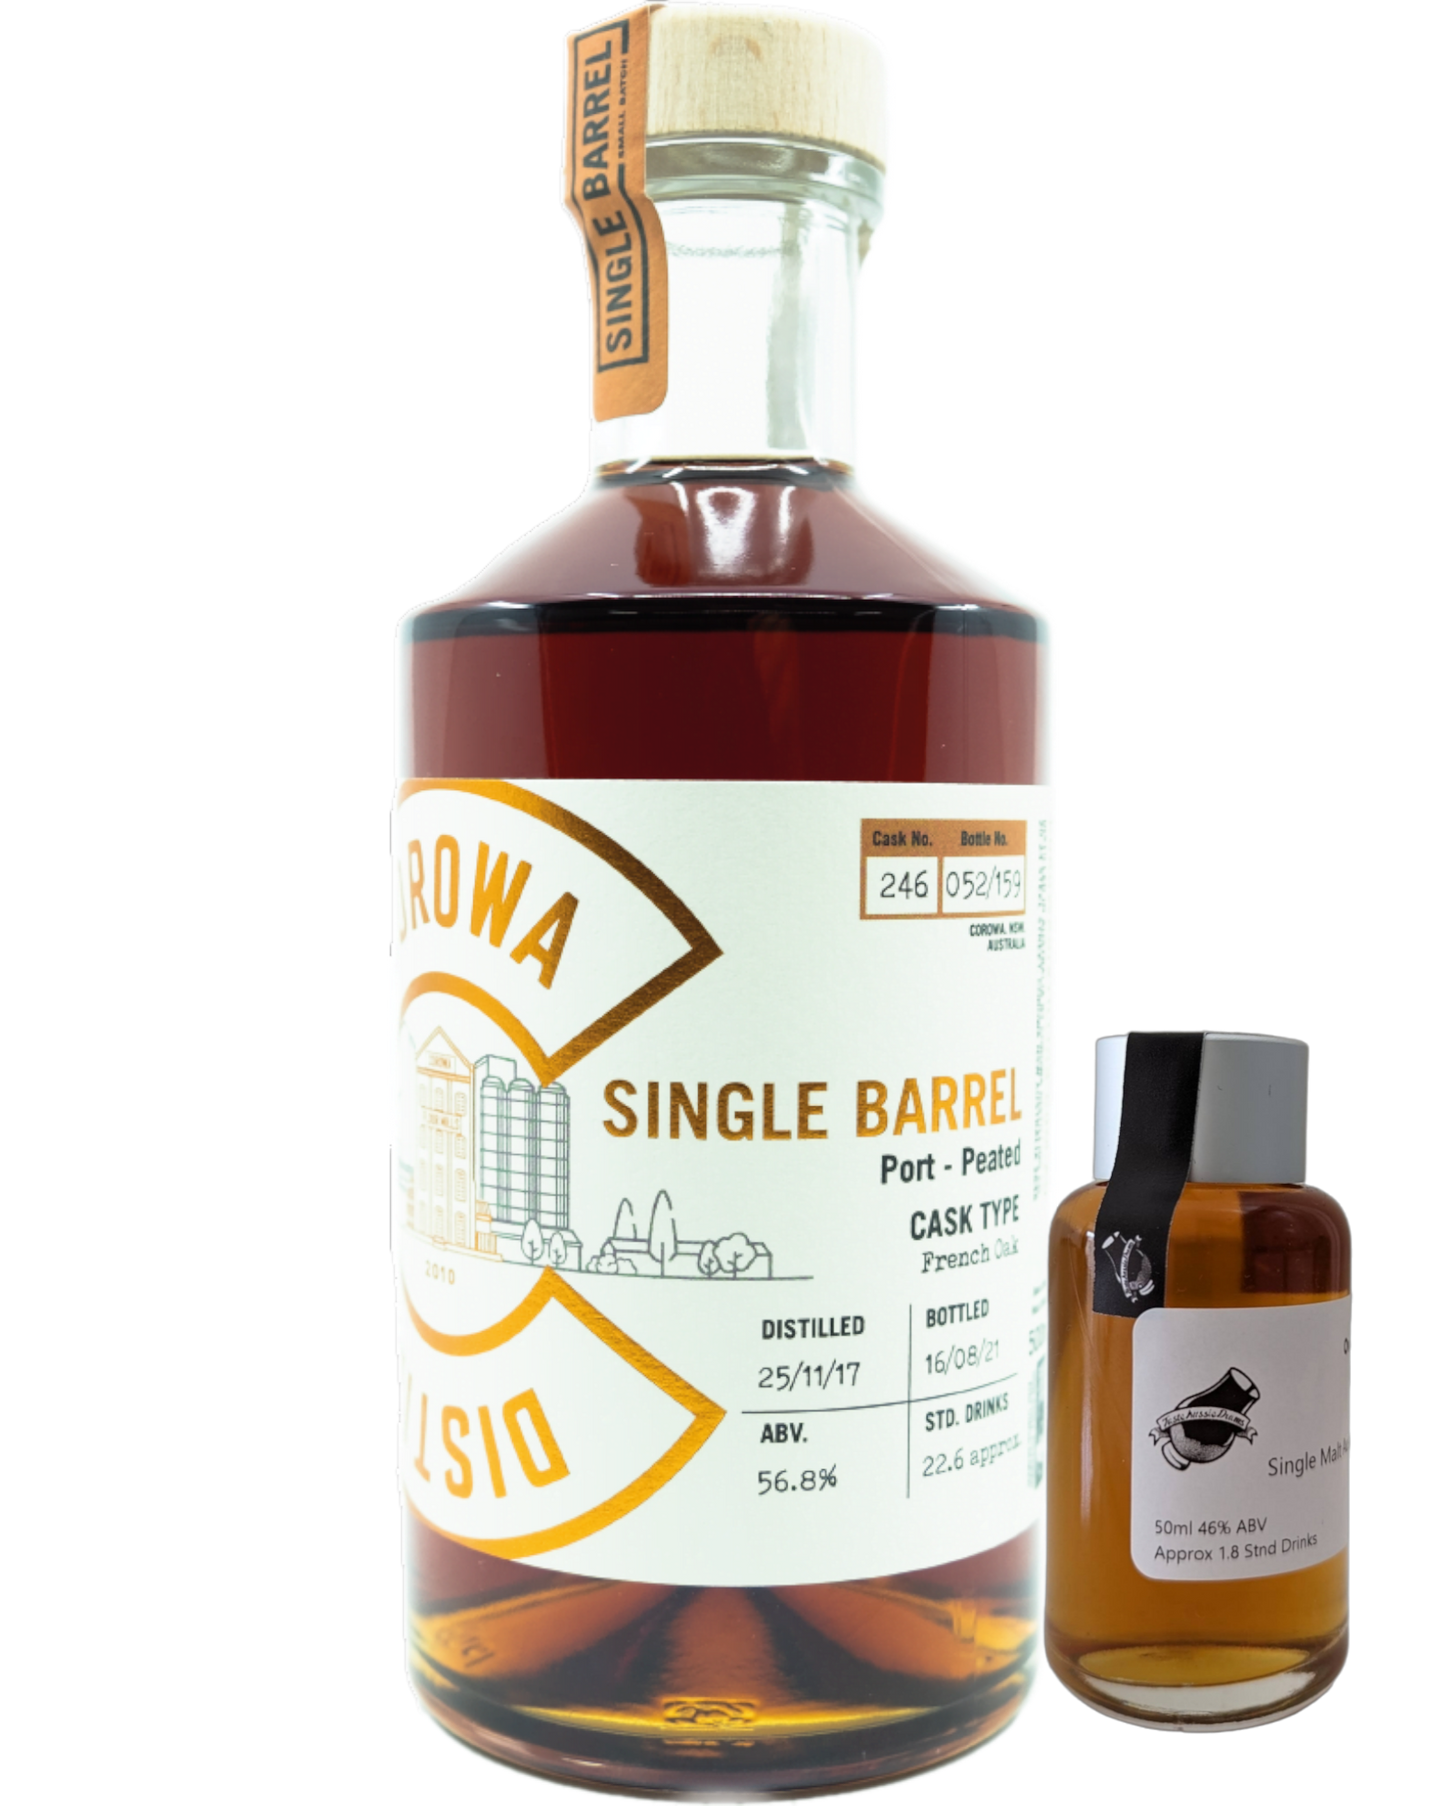 Corowa Distilling Co. 'Single Barrel French Port Peated Cask 246' Various Size Samples